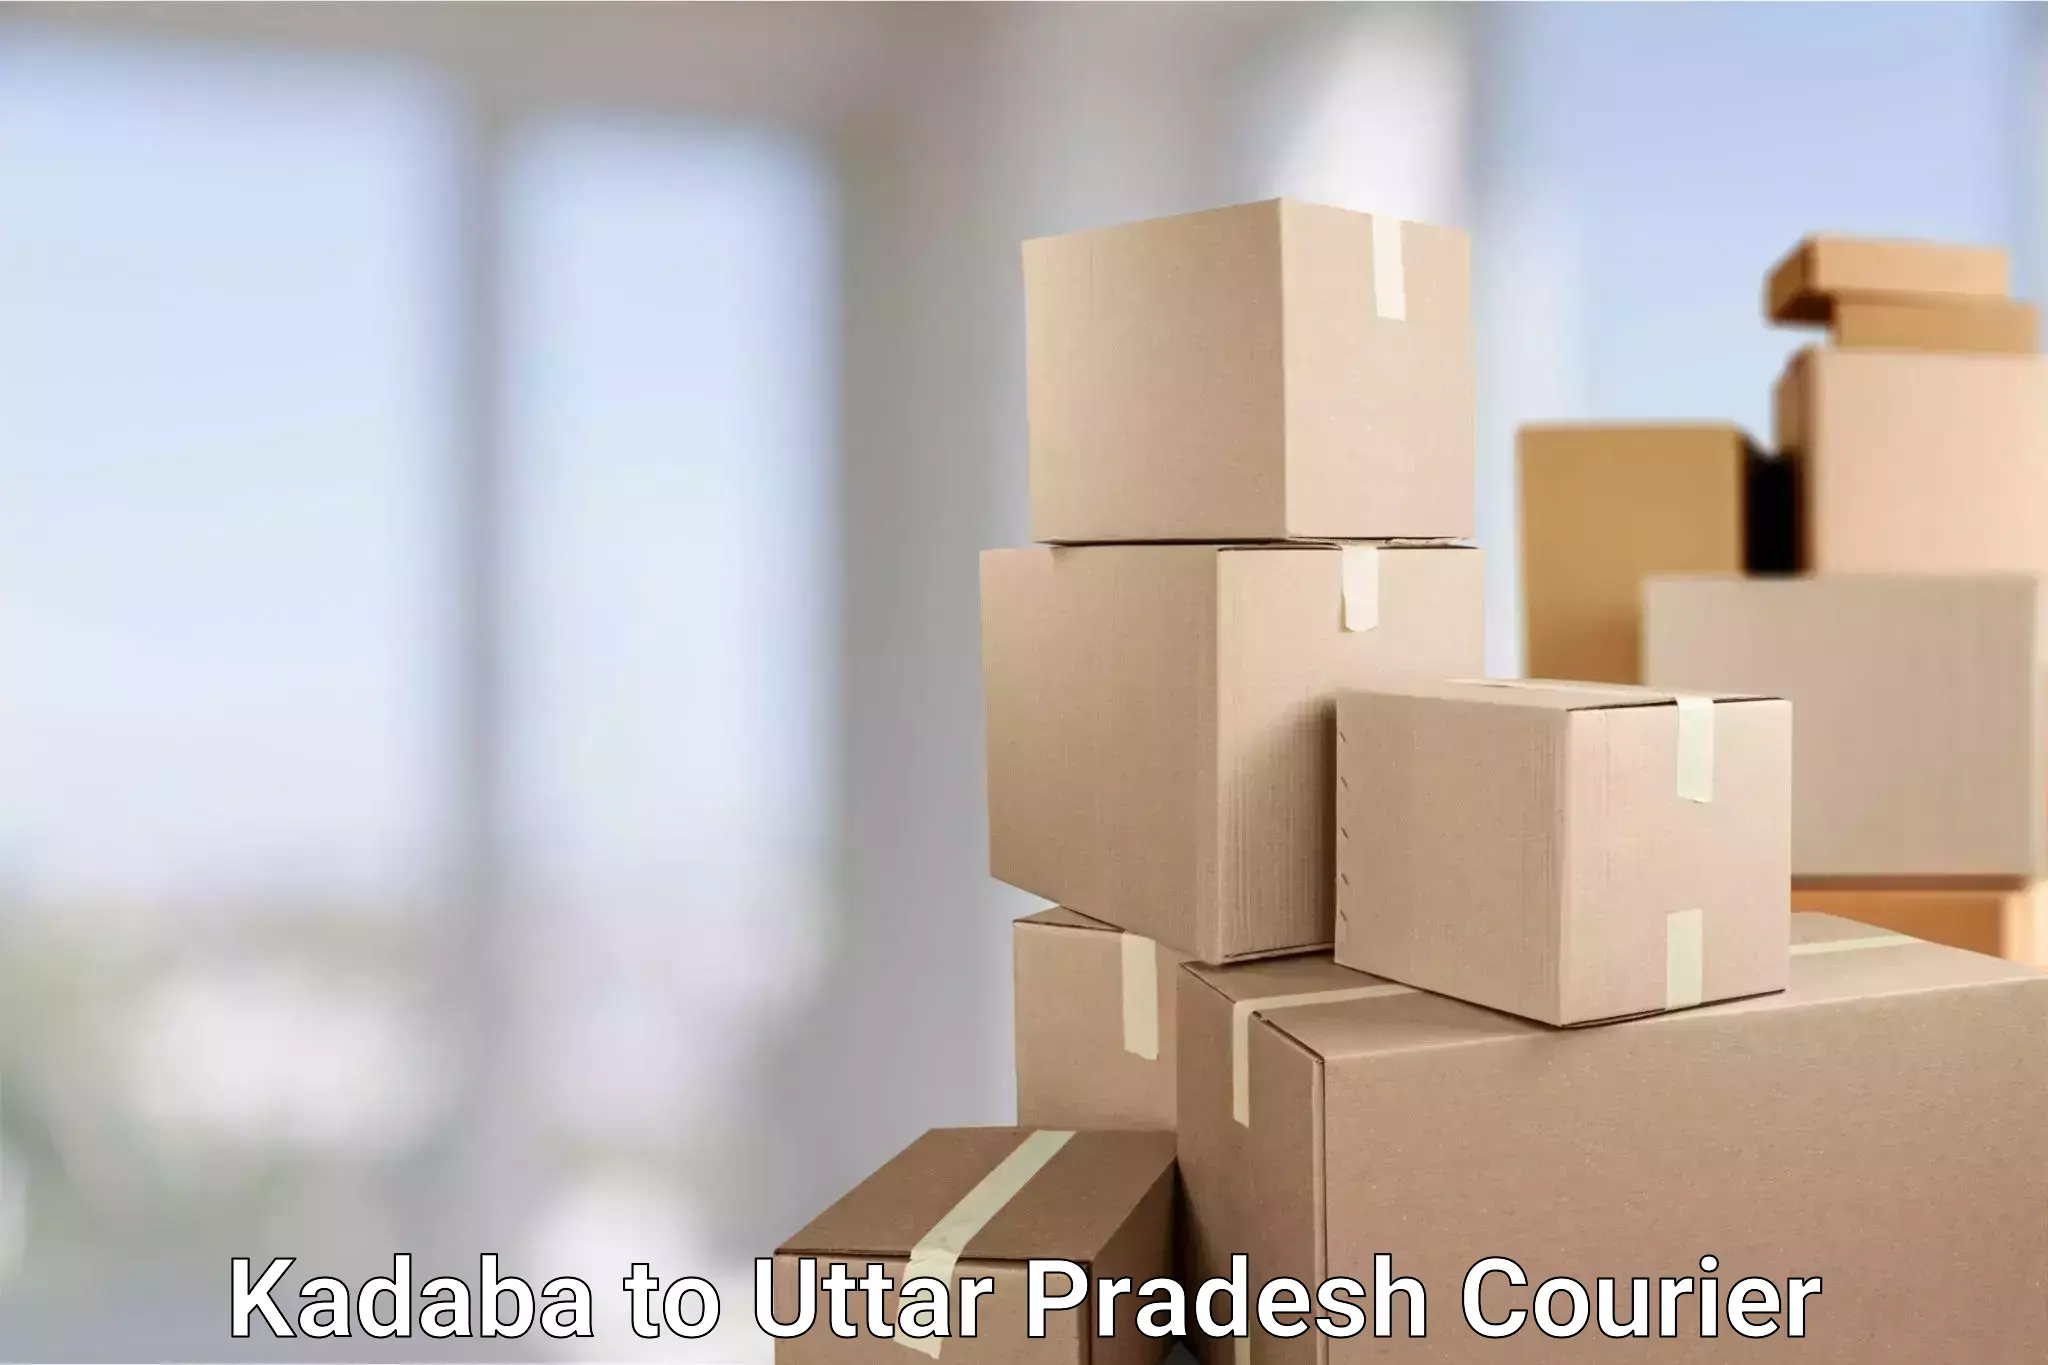 Easy access courier services Kadaba to Allahabad